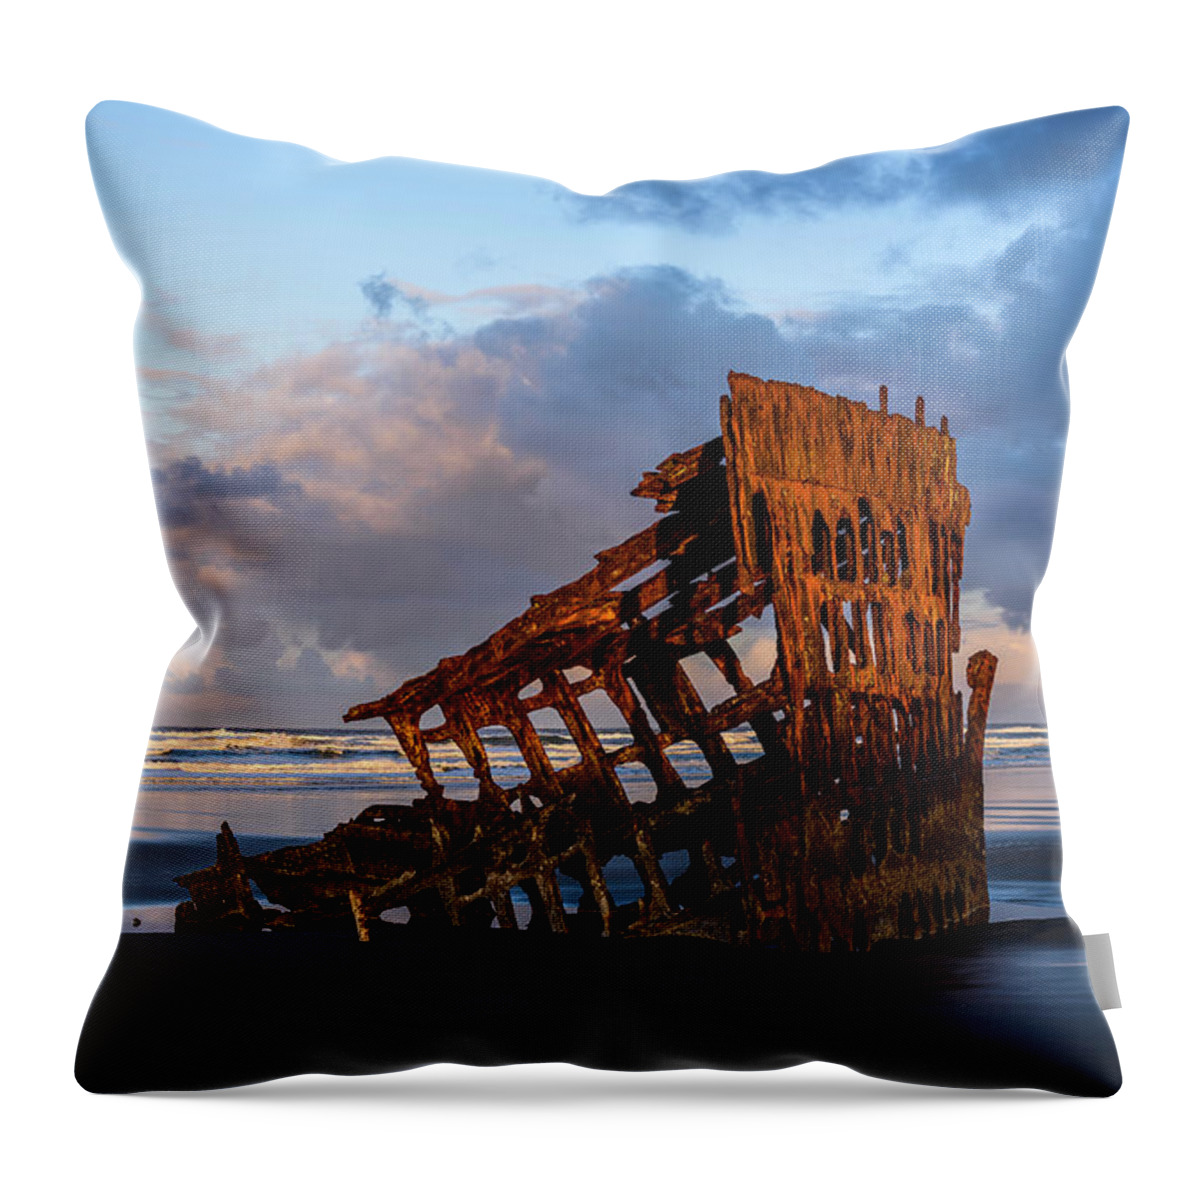 Beaches Throw Pillow featuring the photograph Wreck of the Peter Iredale by Robert Potts